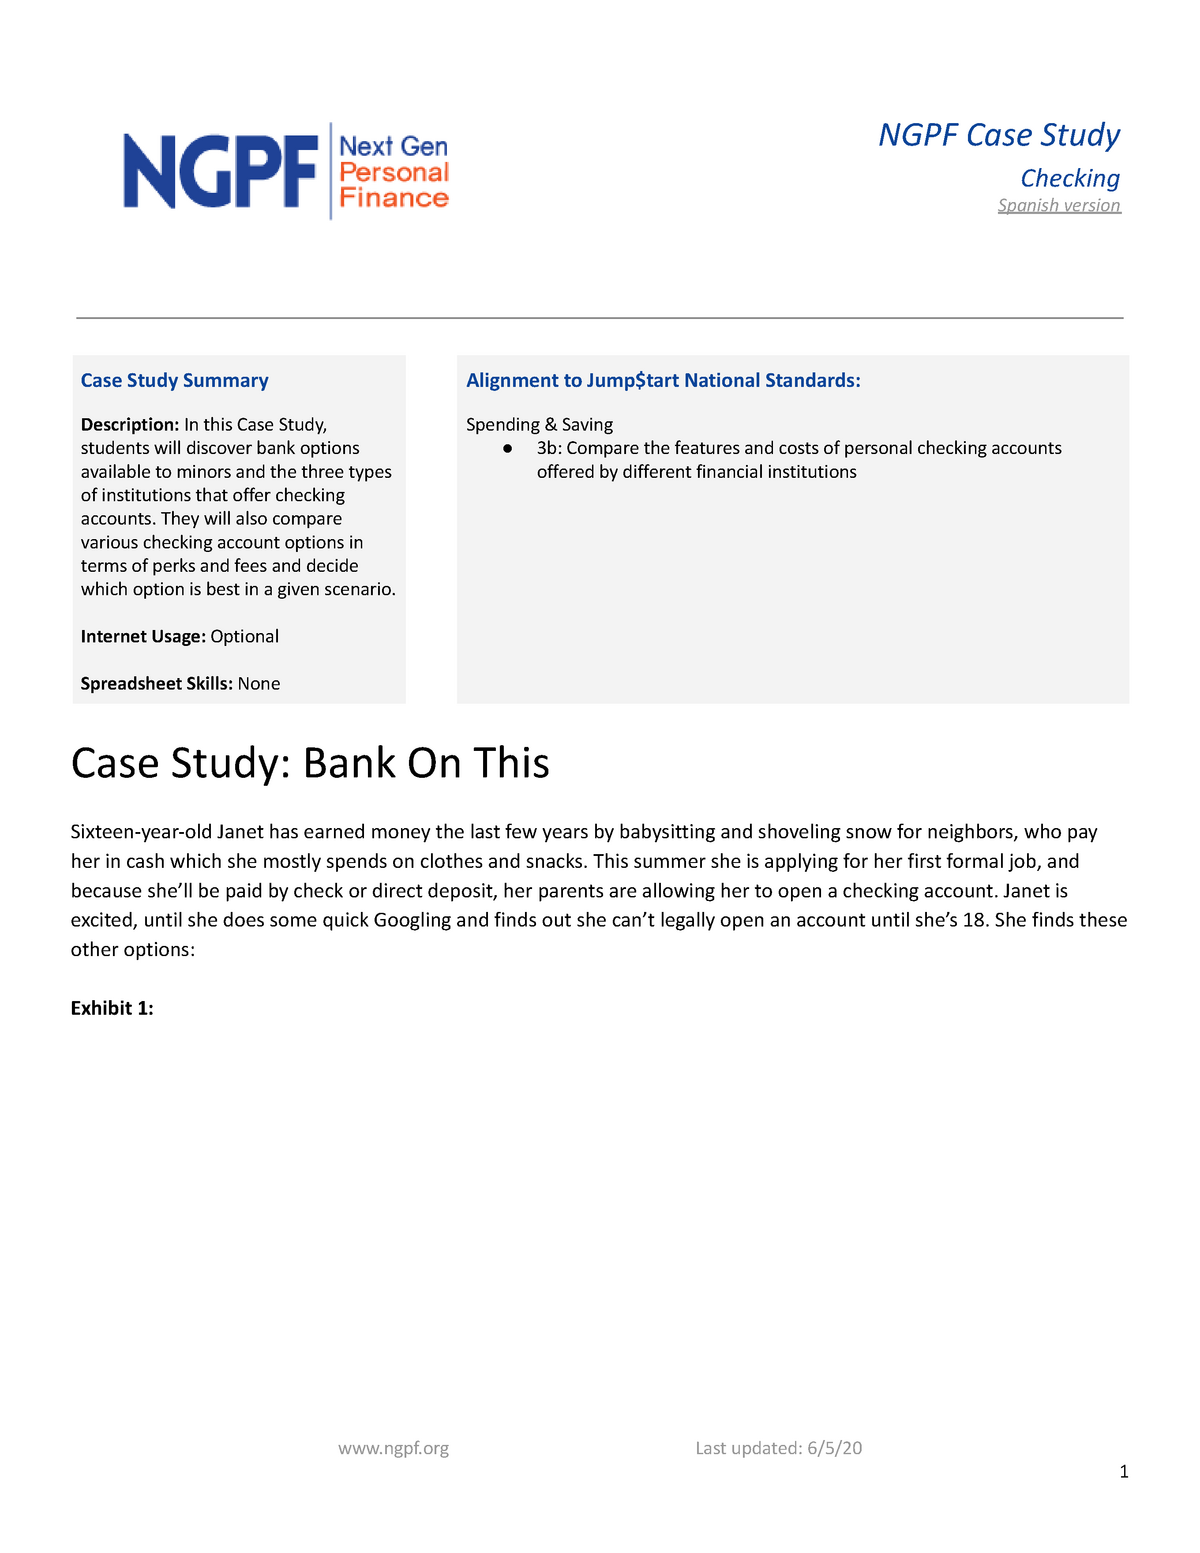 ngpf case study checking bank on this answer key